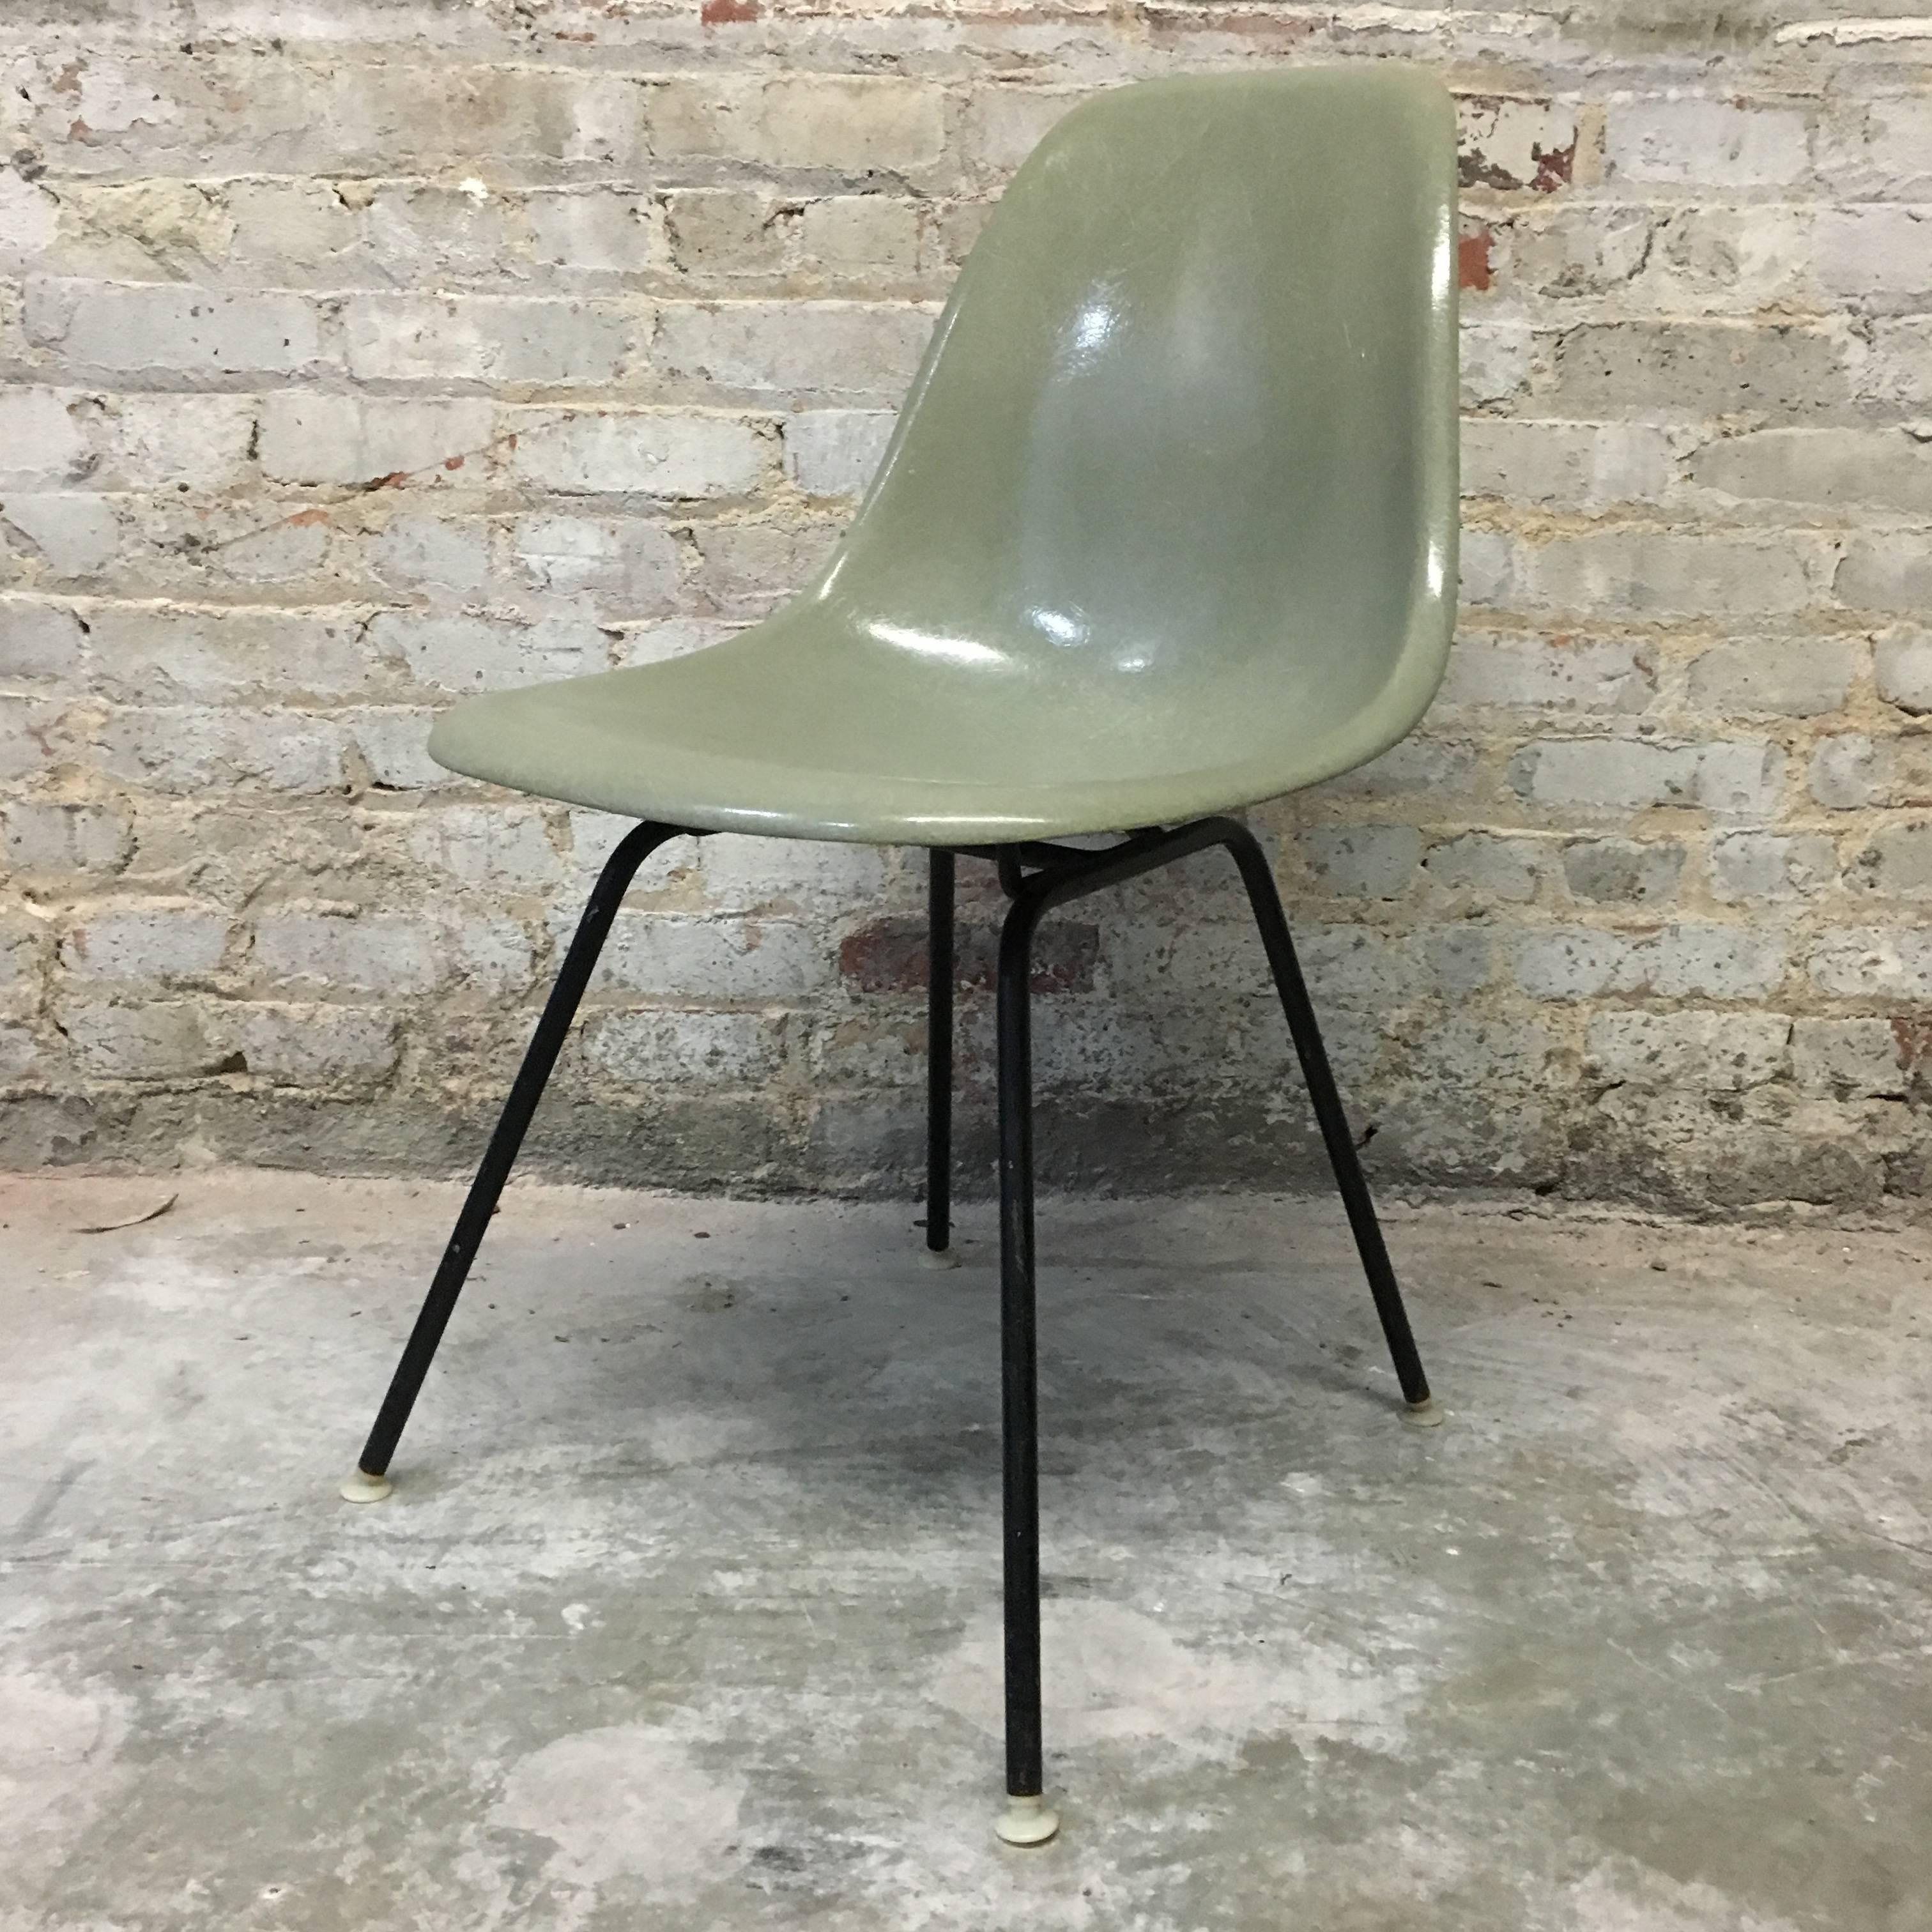 Four Herman Miller Eames Seafoam Green Dining Chairs 3